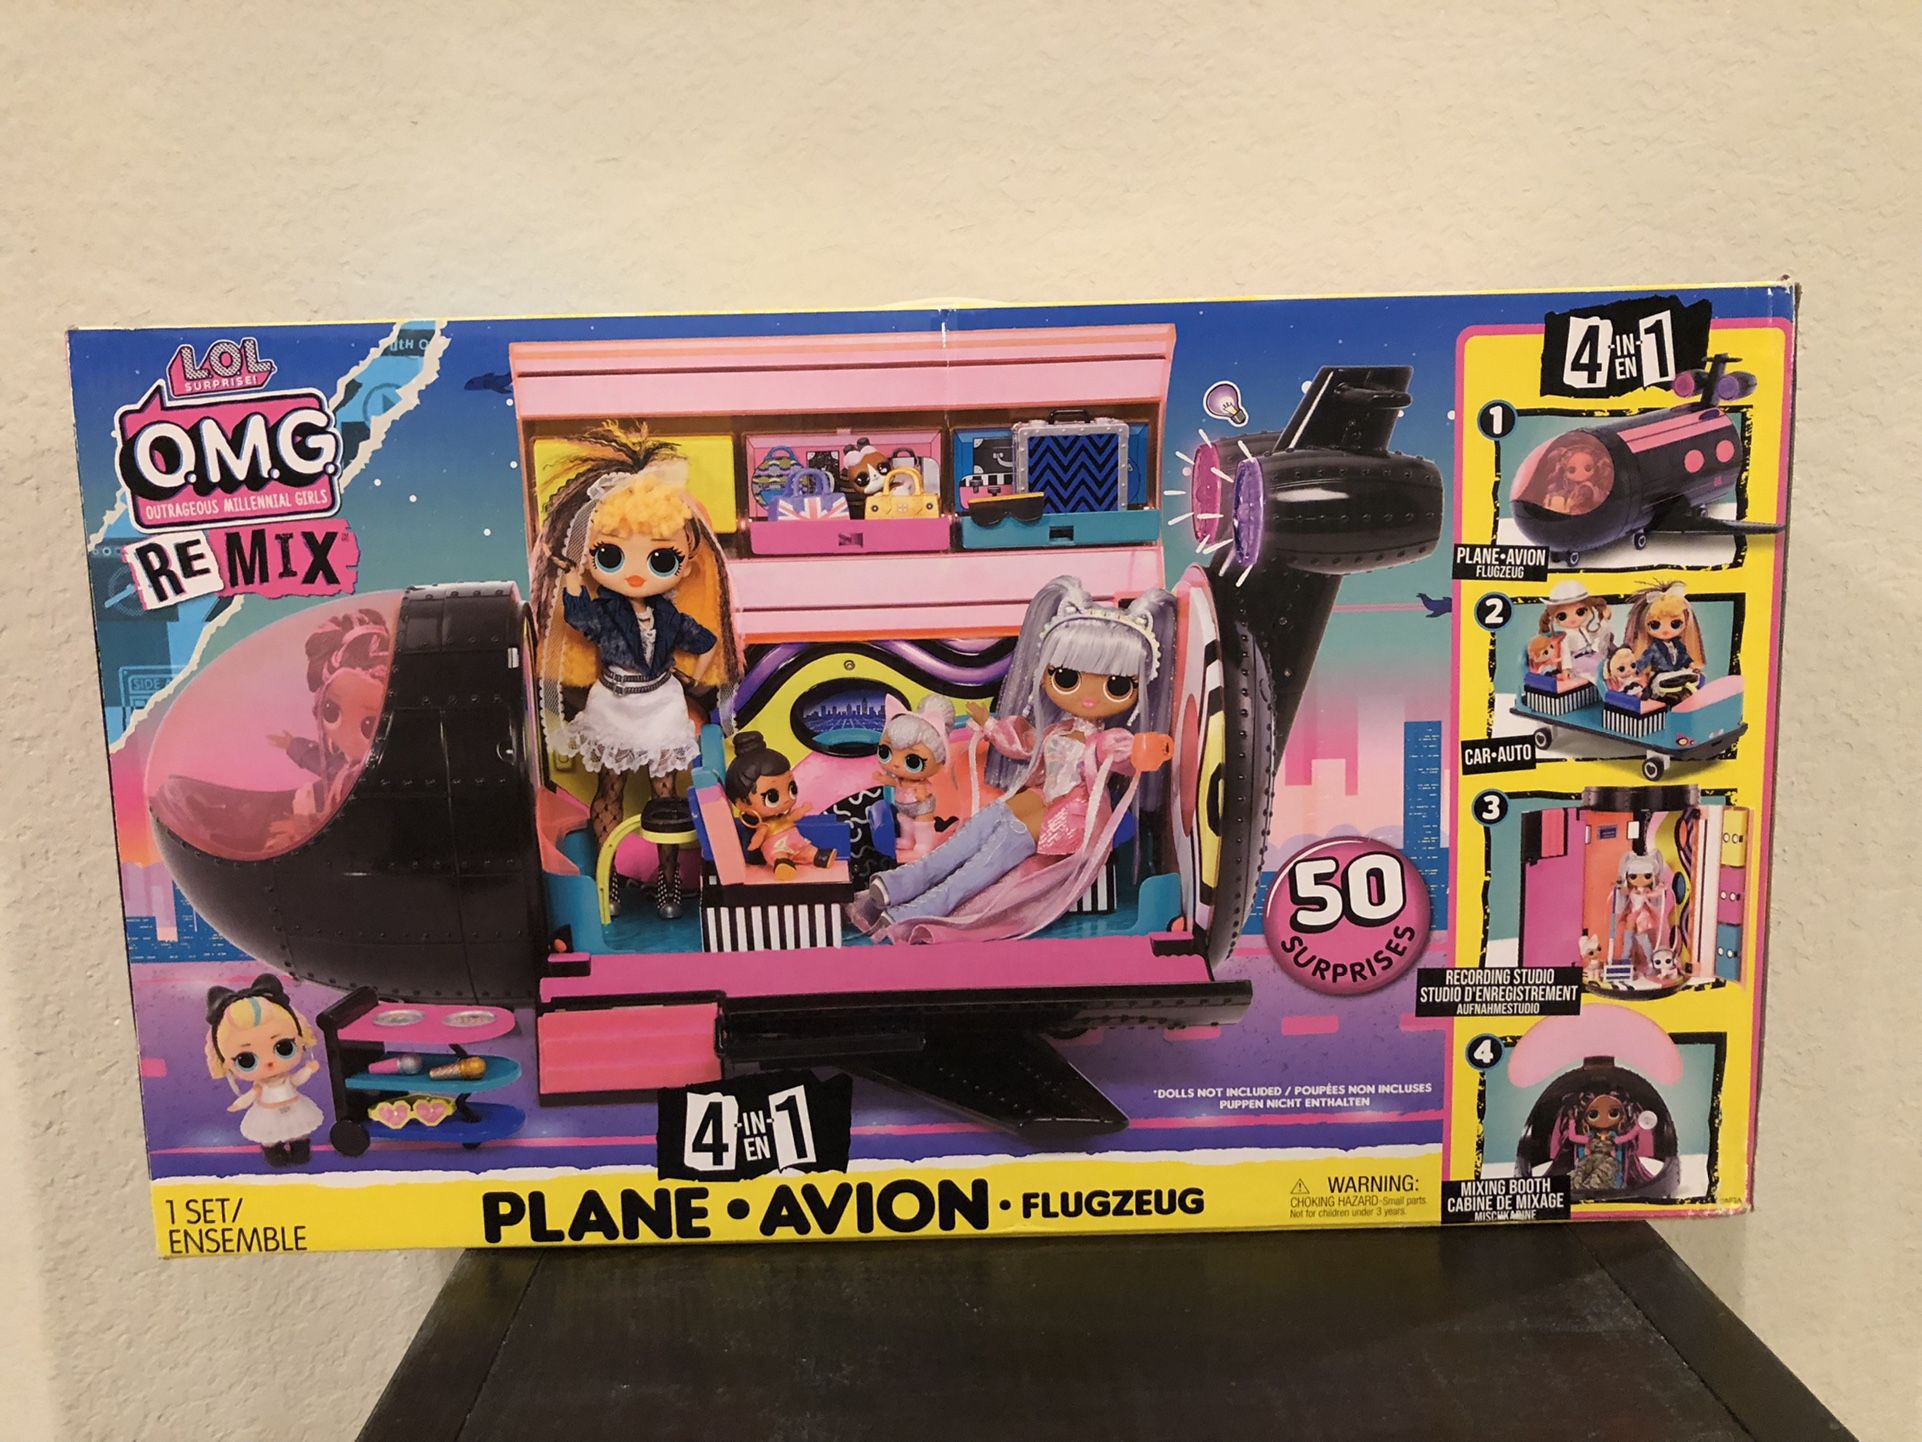 LOL Surprise OMG Remix 4 In 1 Plane Playset With Music Recording Studio Mixing Booth And 50 Surprises